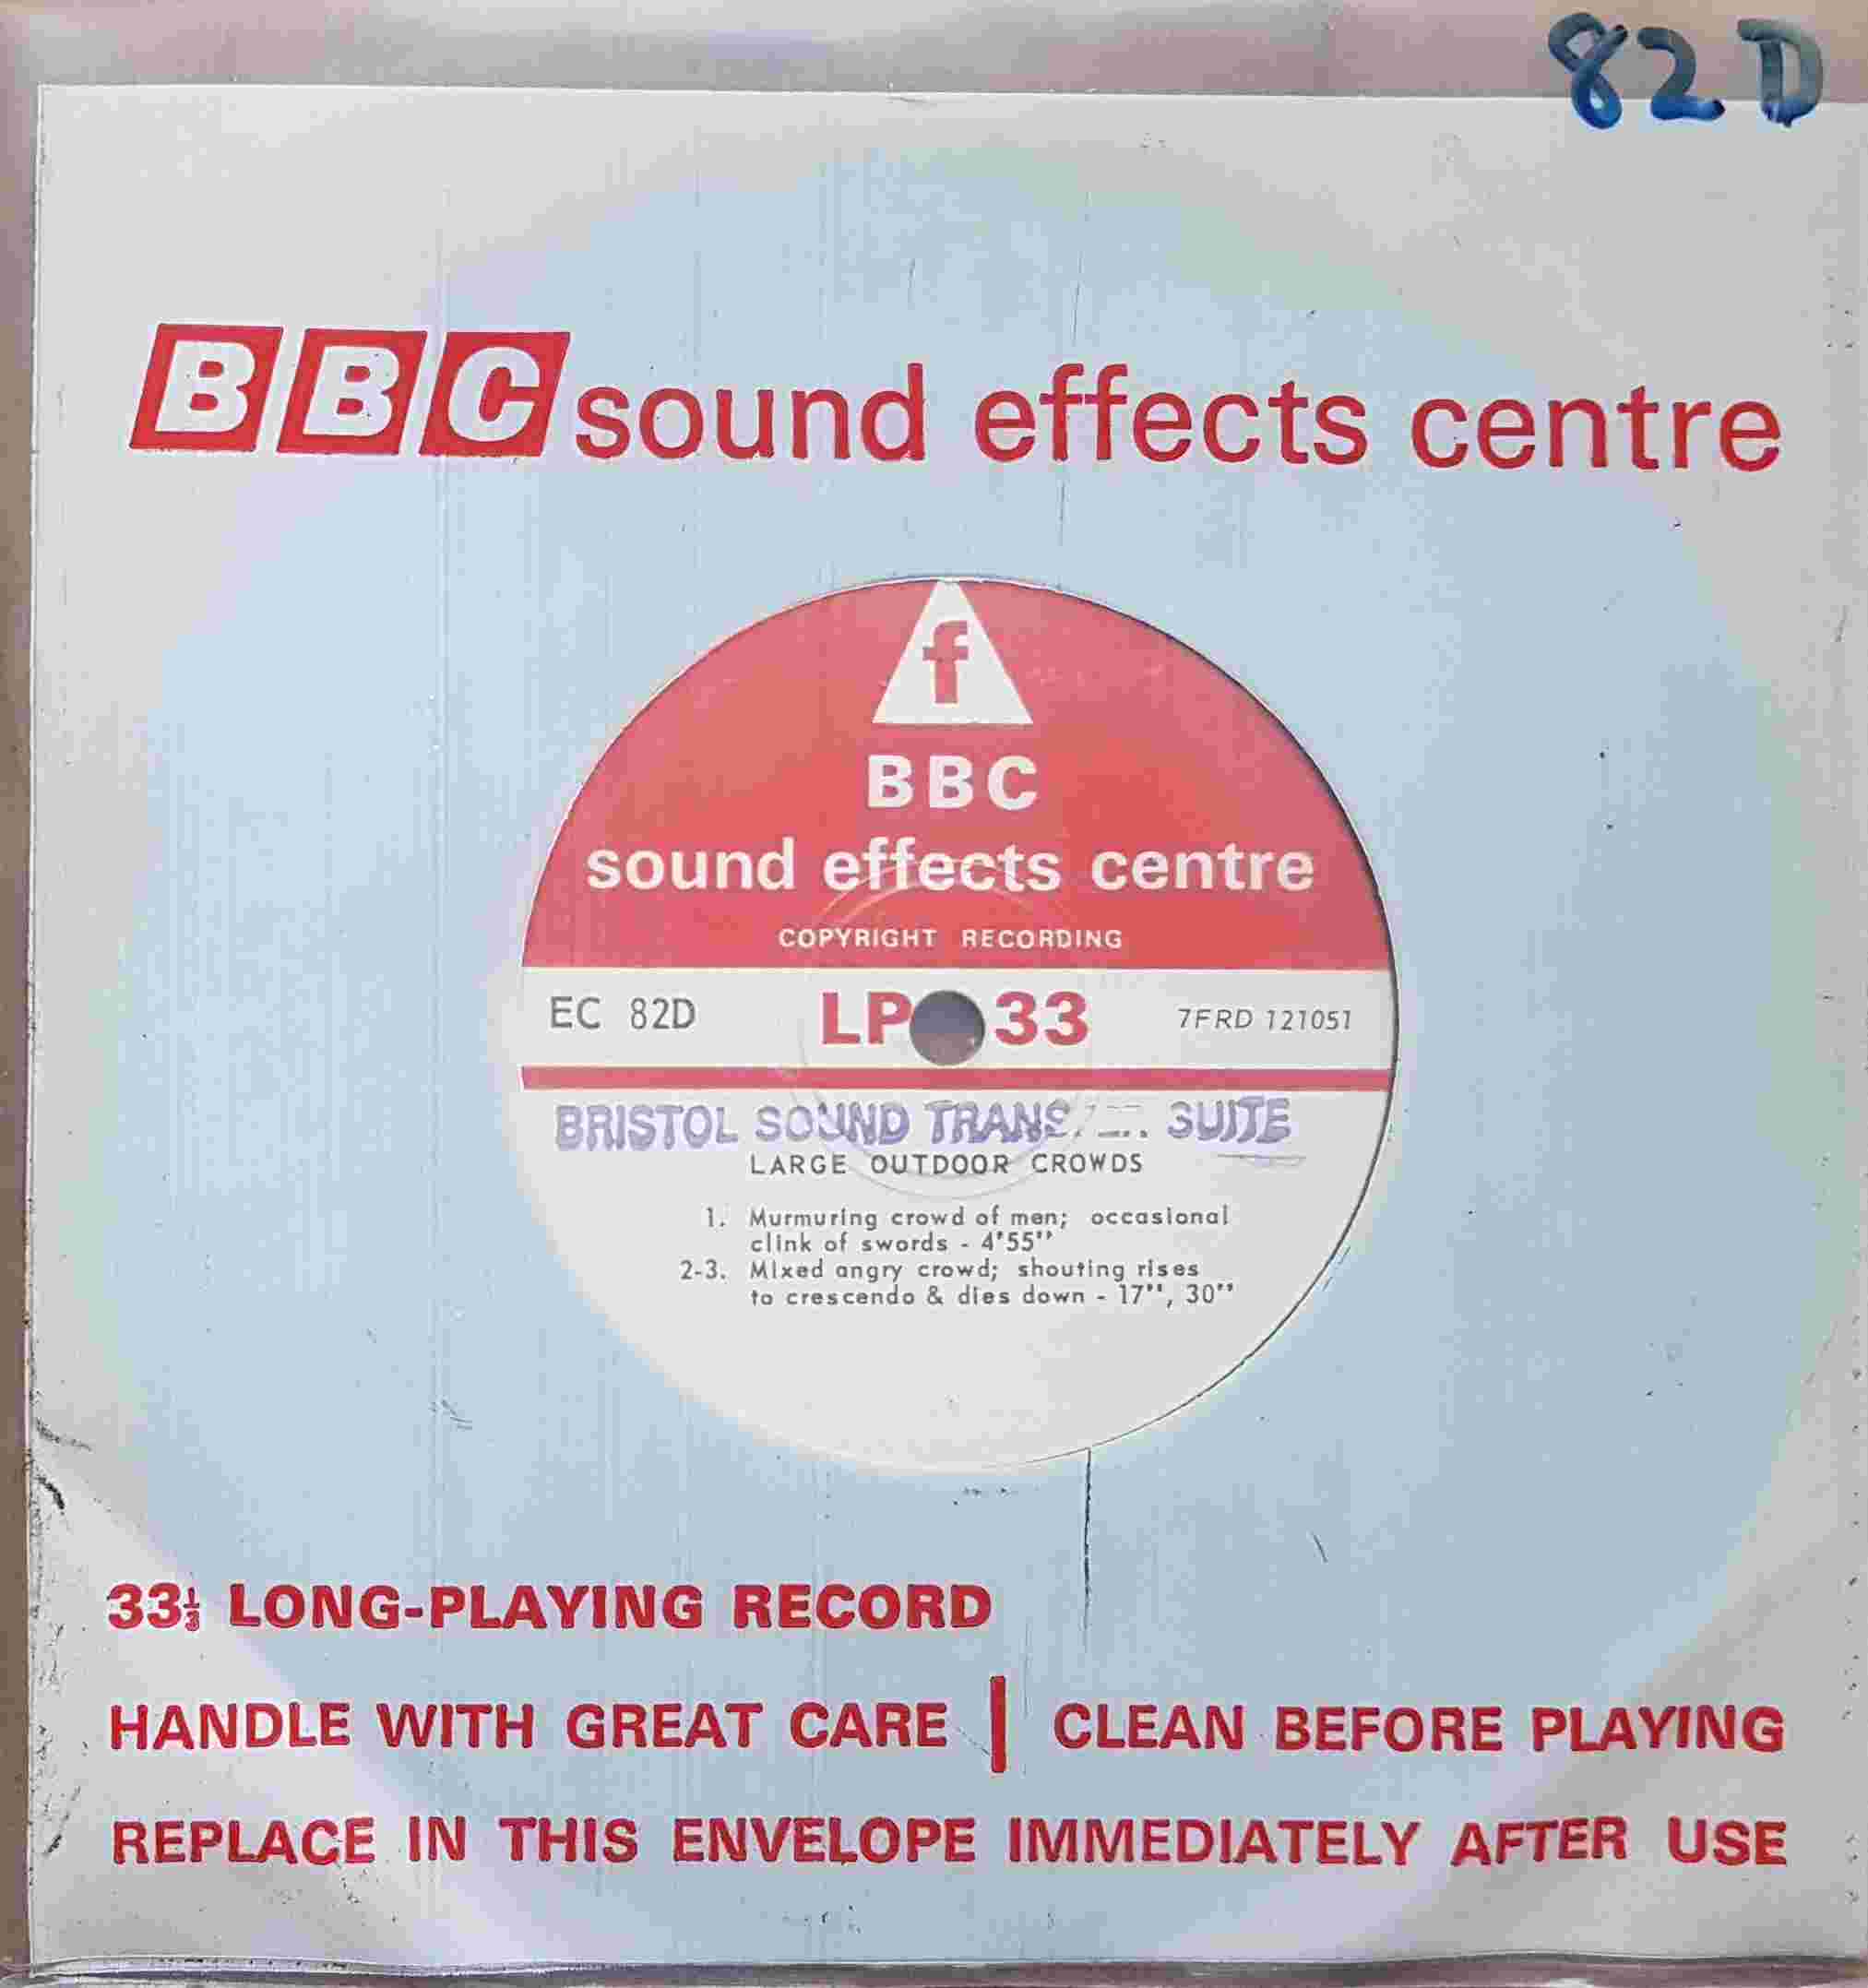 Picture of EC 82D Large outdoor crowds by artist Not registered from the BBC singles - Records and Tapes library